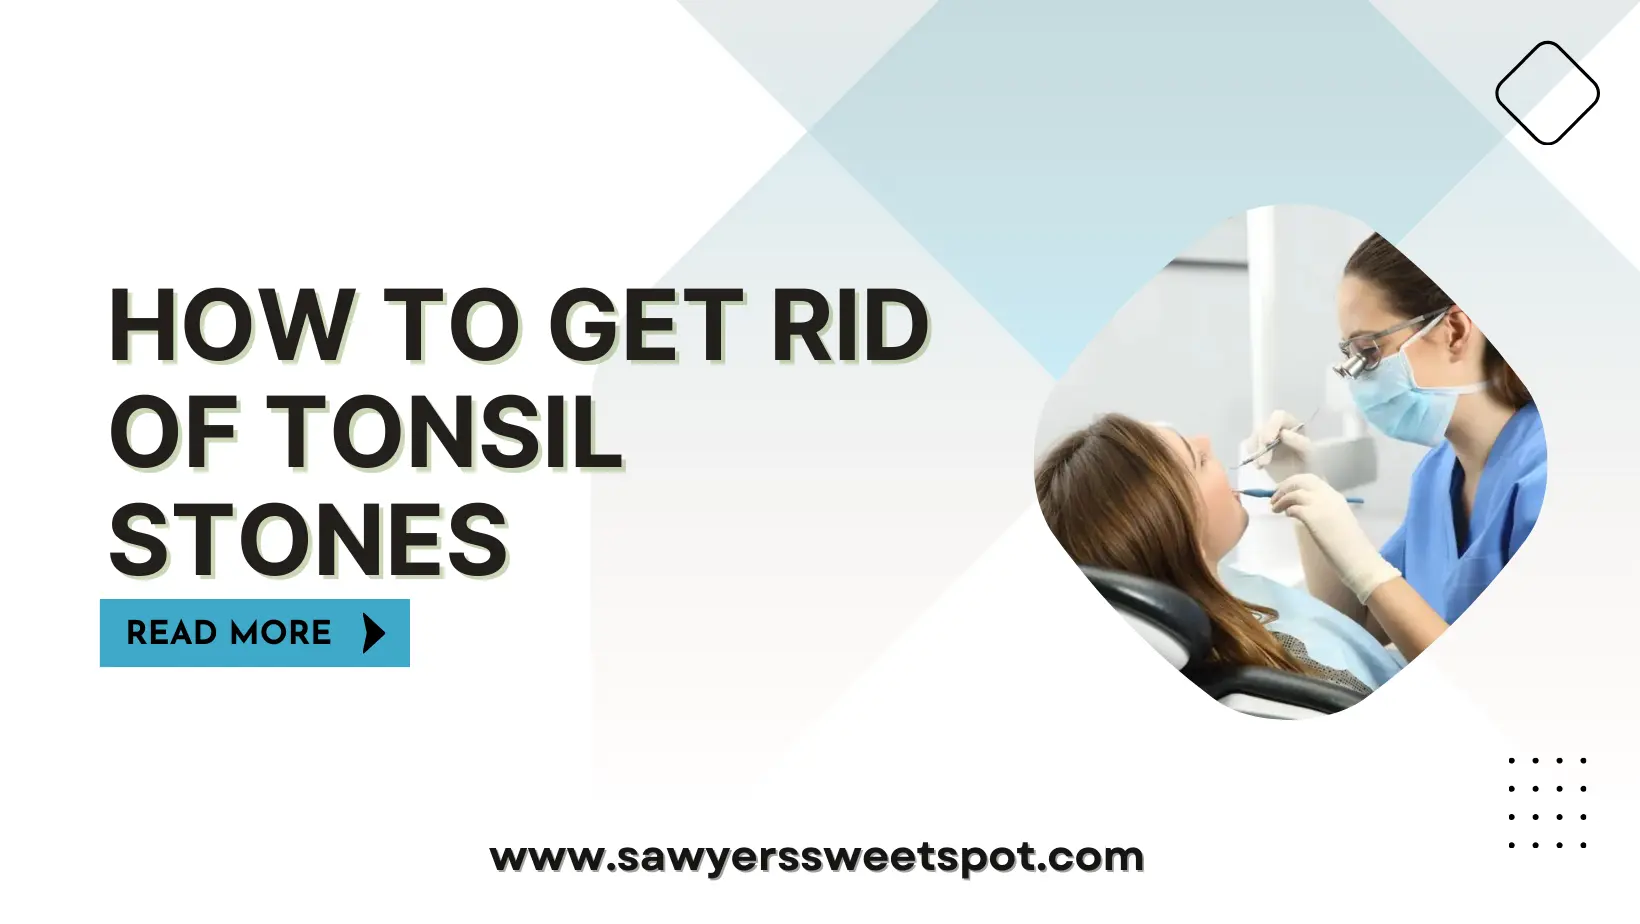 How to Get Rid of Tonsil Stones Without Surgery?